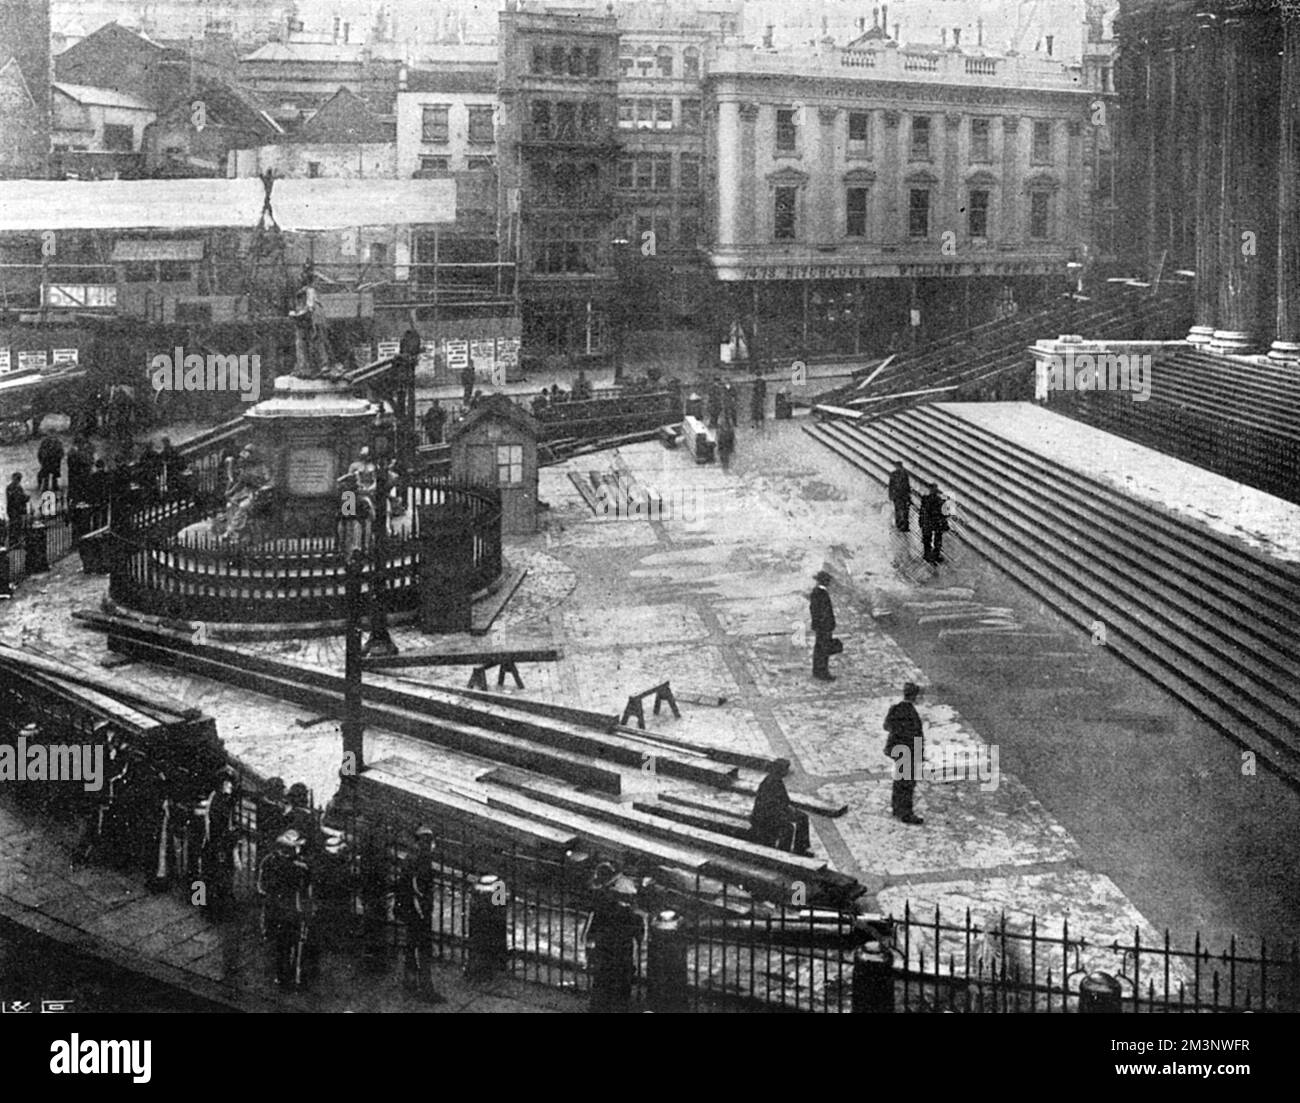 Preparations for the Diamond Jubilee service at St Paul's Cathedral. Viewing platforms are erected for the public to view the arrival of Queen Victoria. The Queen's carriage would draw up at the spot where the two figures are standing at the foot of the steps. The view is from the premises of Pawsons and Leafs, ladies clothing wholesale warehousemen     Date: June 1897 Stock Photo